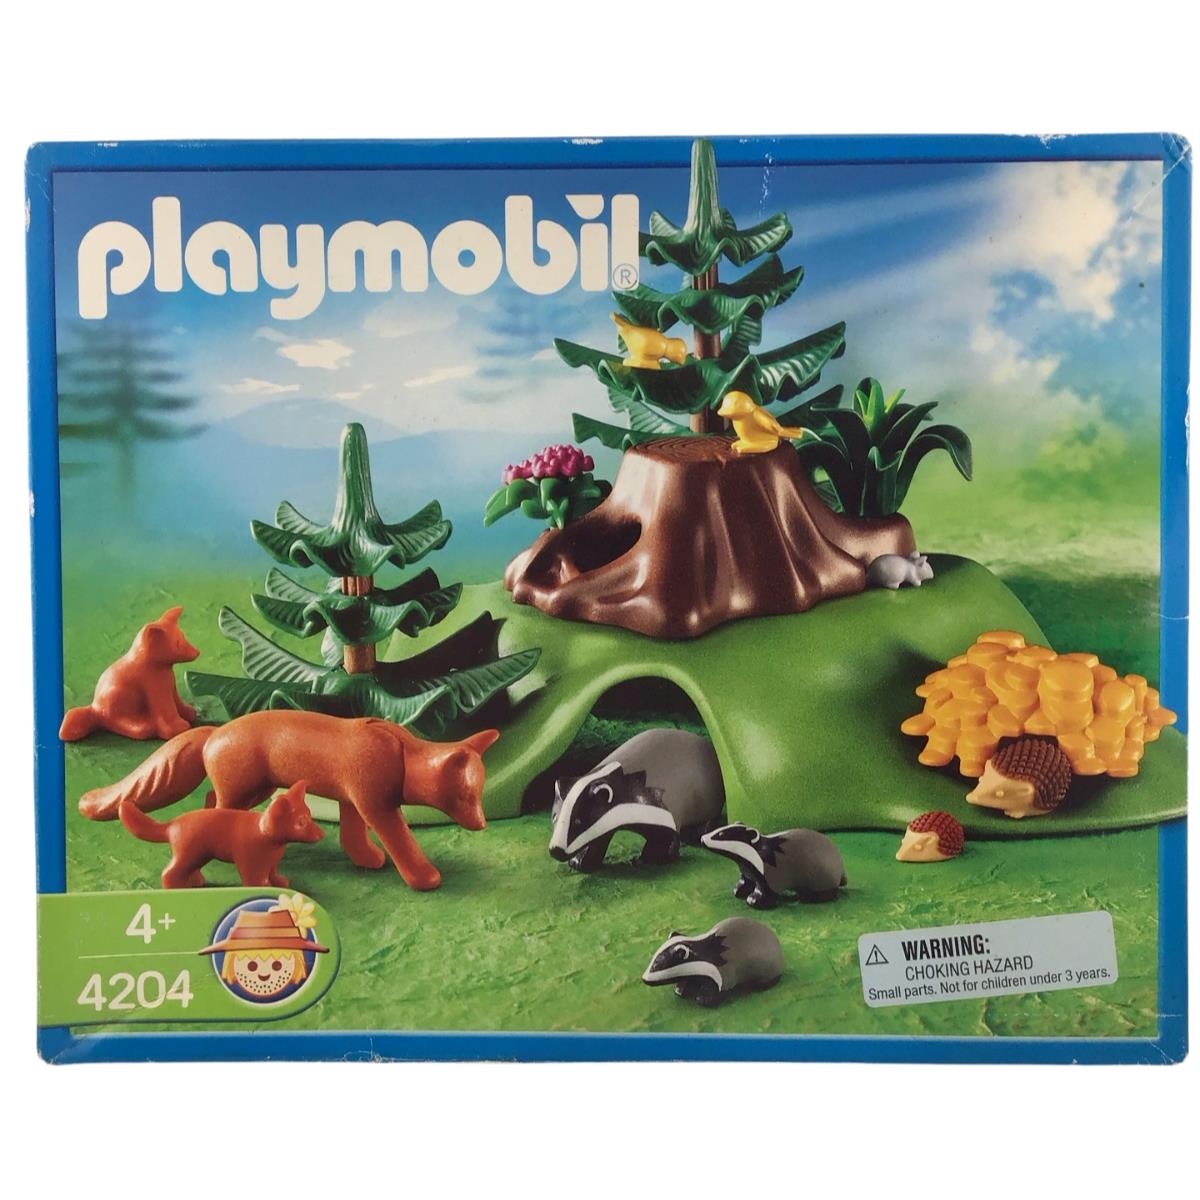 Playmobil 4204 Forest Animals w/ Cave Fox Badger Ages 4+ Toy Fast